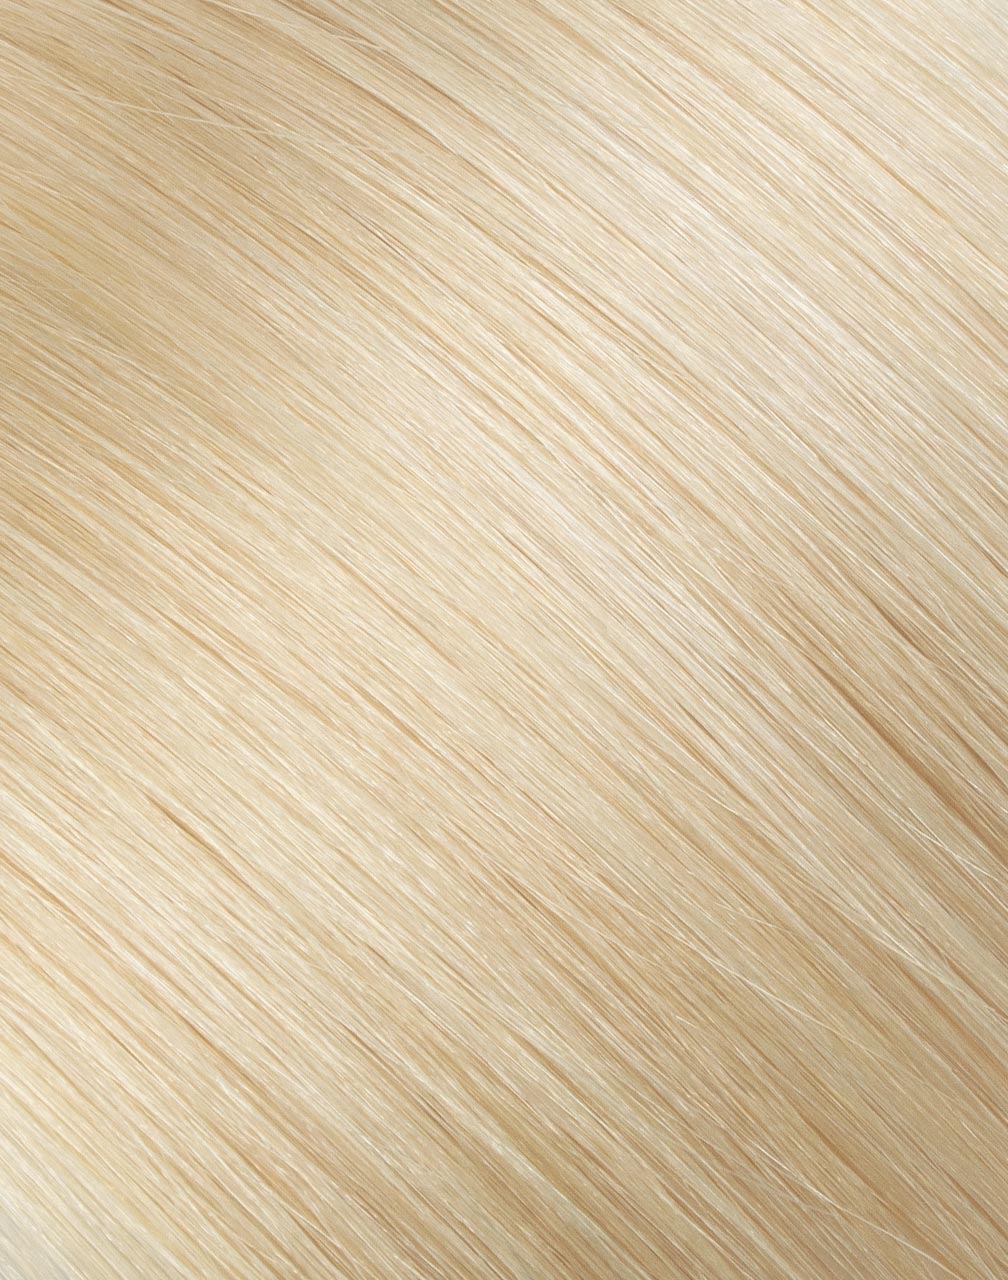 808 Exclusive Weft | 18" Straight